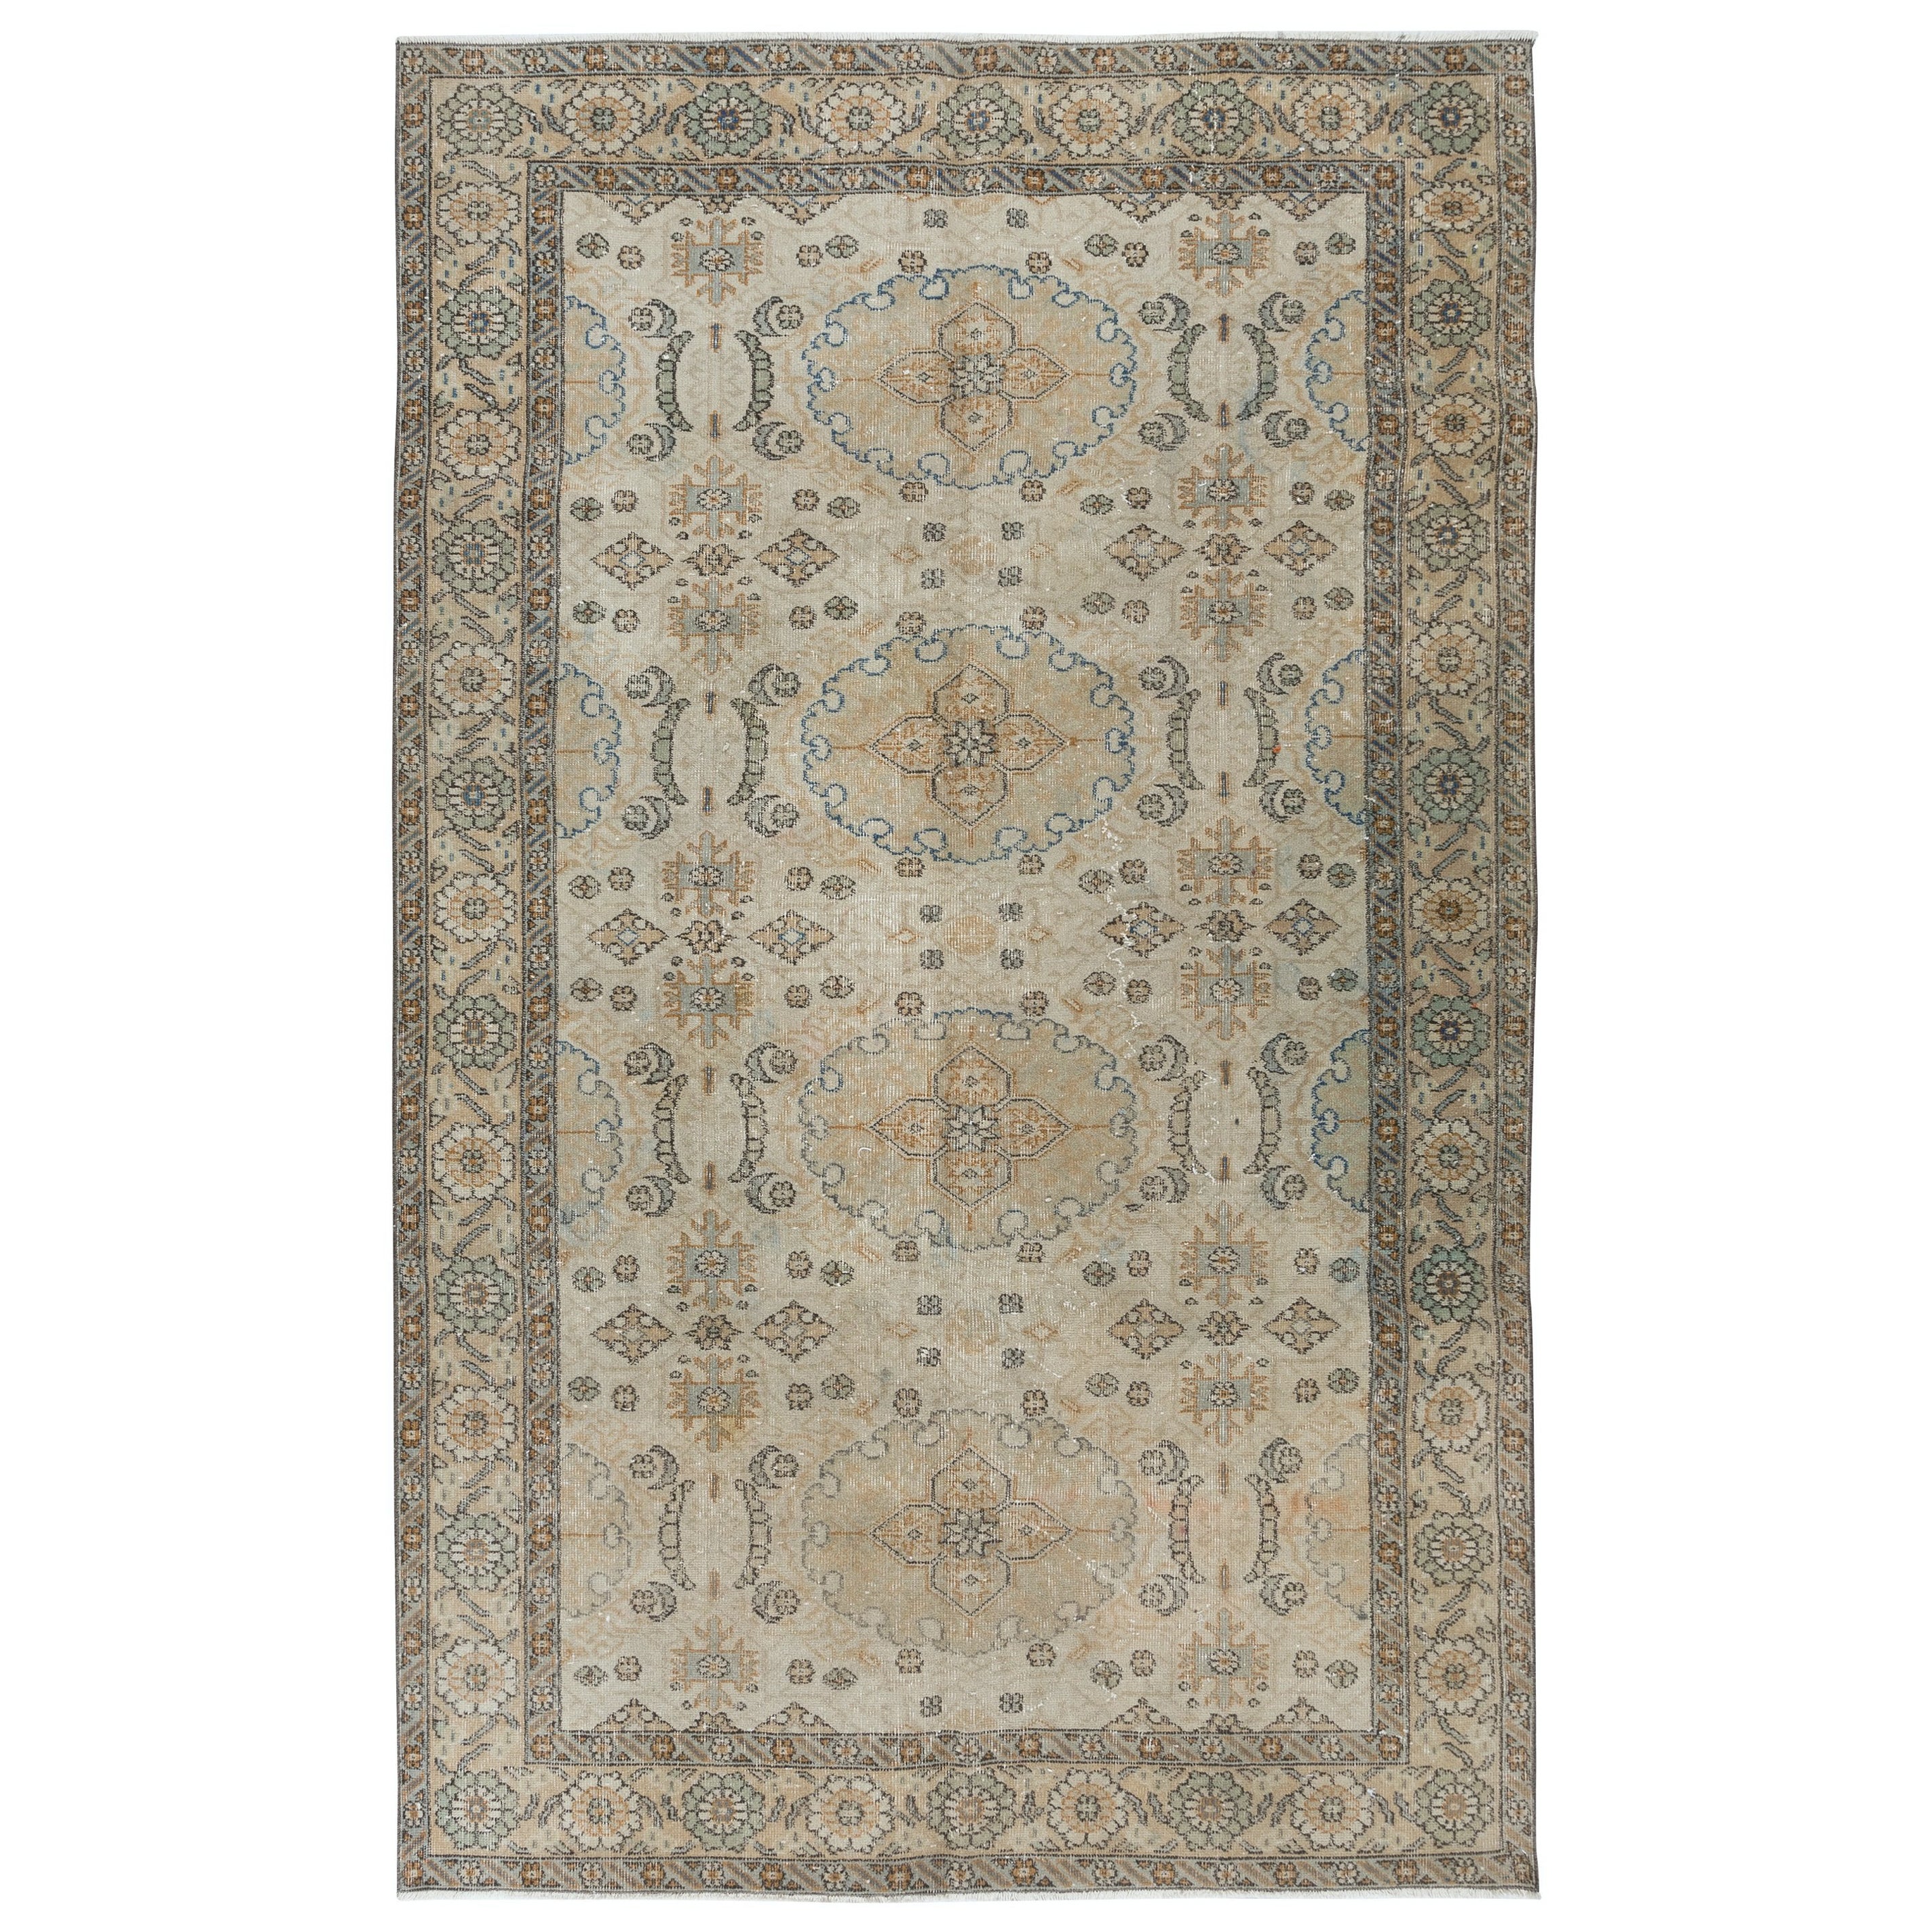 5.6x8.8 Ft Vintage Handmade Anatolian Oushak Rug in Beige for Country Homes